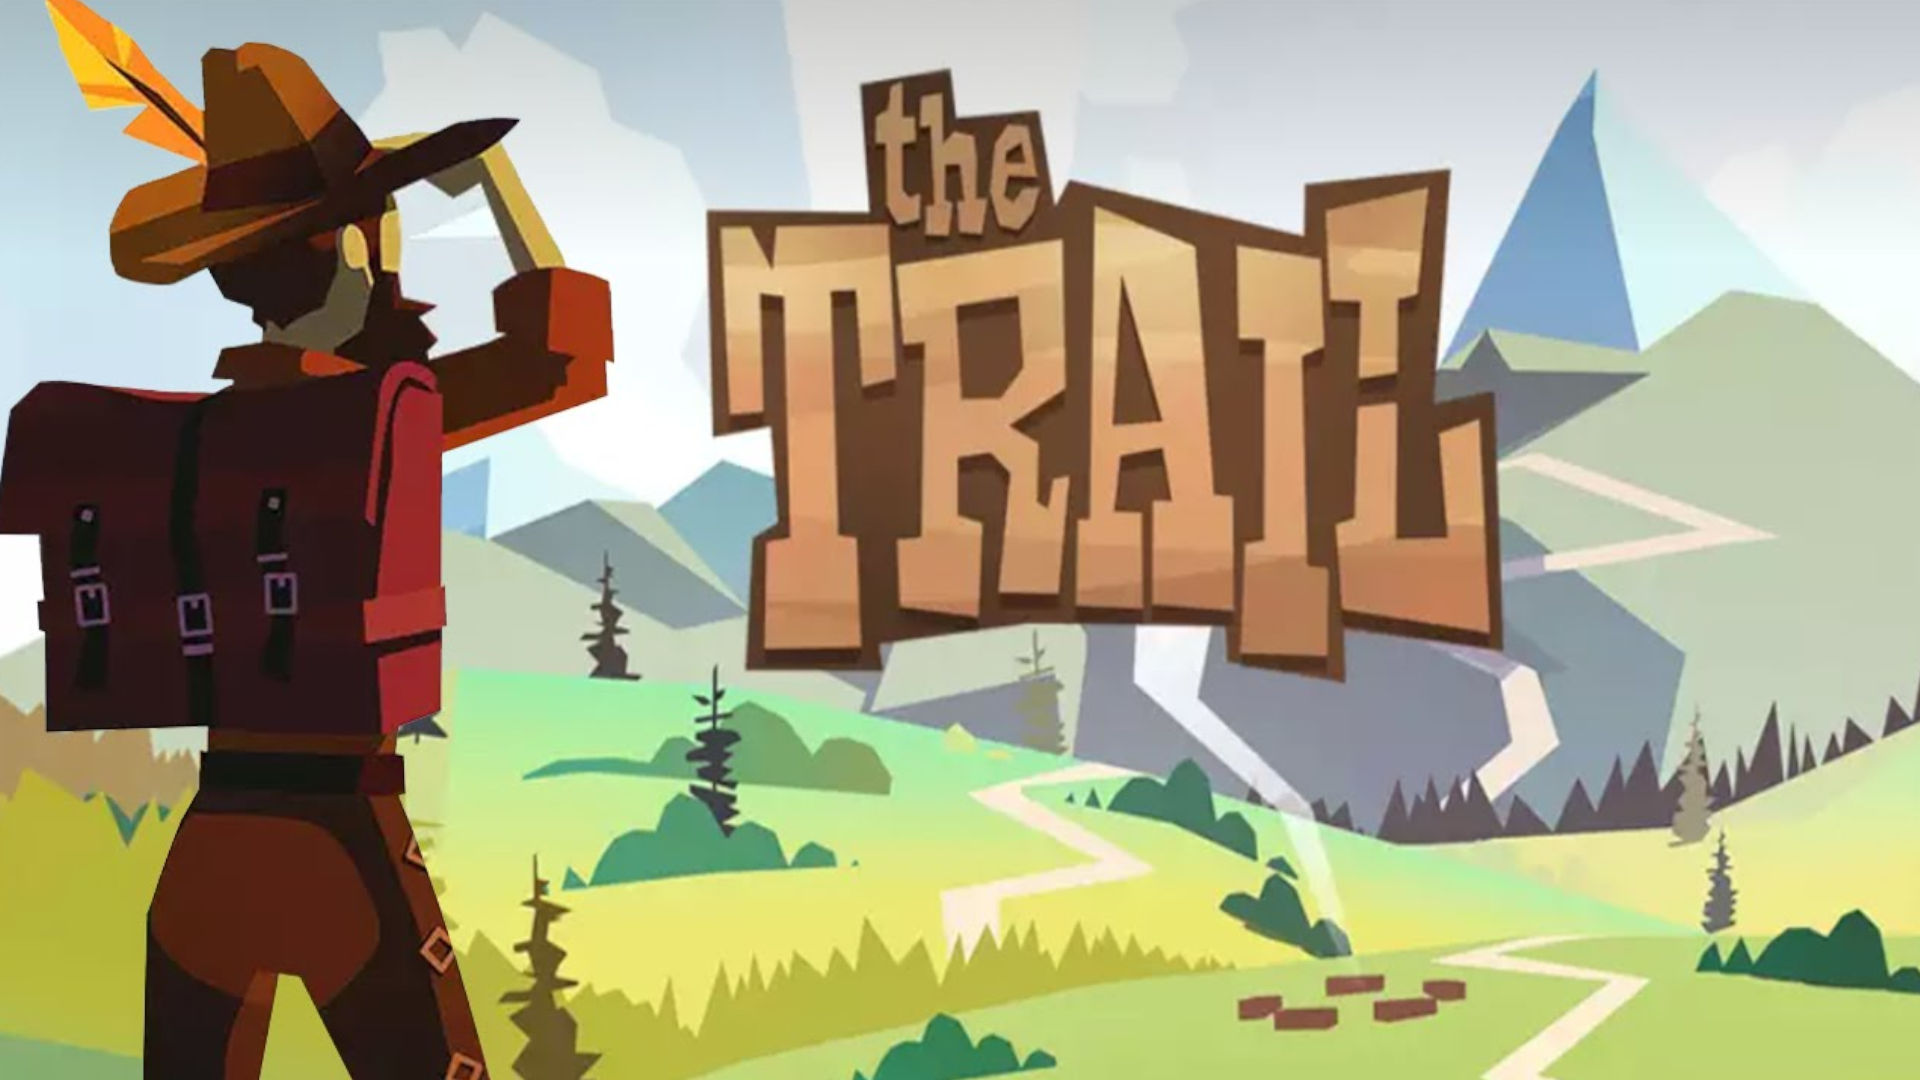 Exploration games: The Trail cover art showing a hiker looking at the logo.